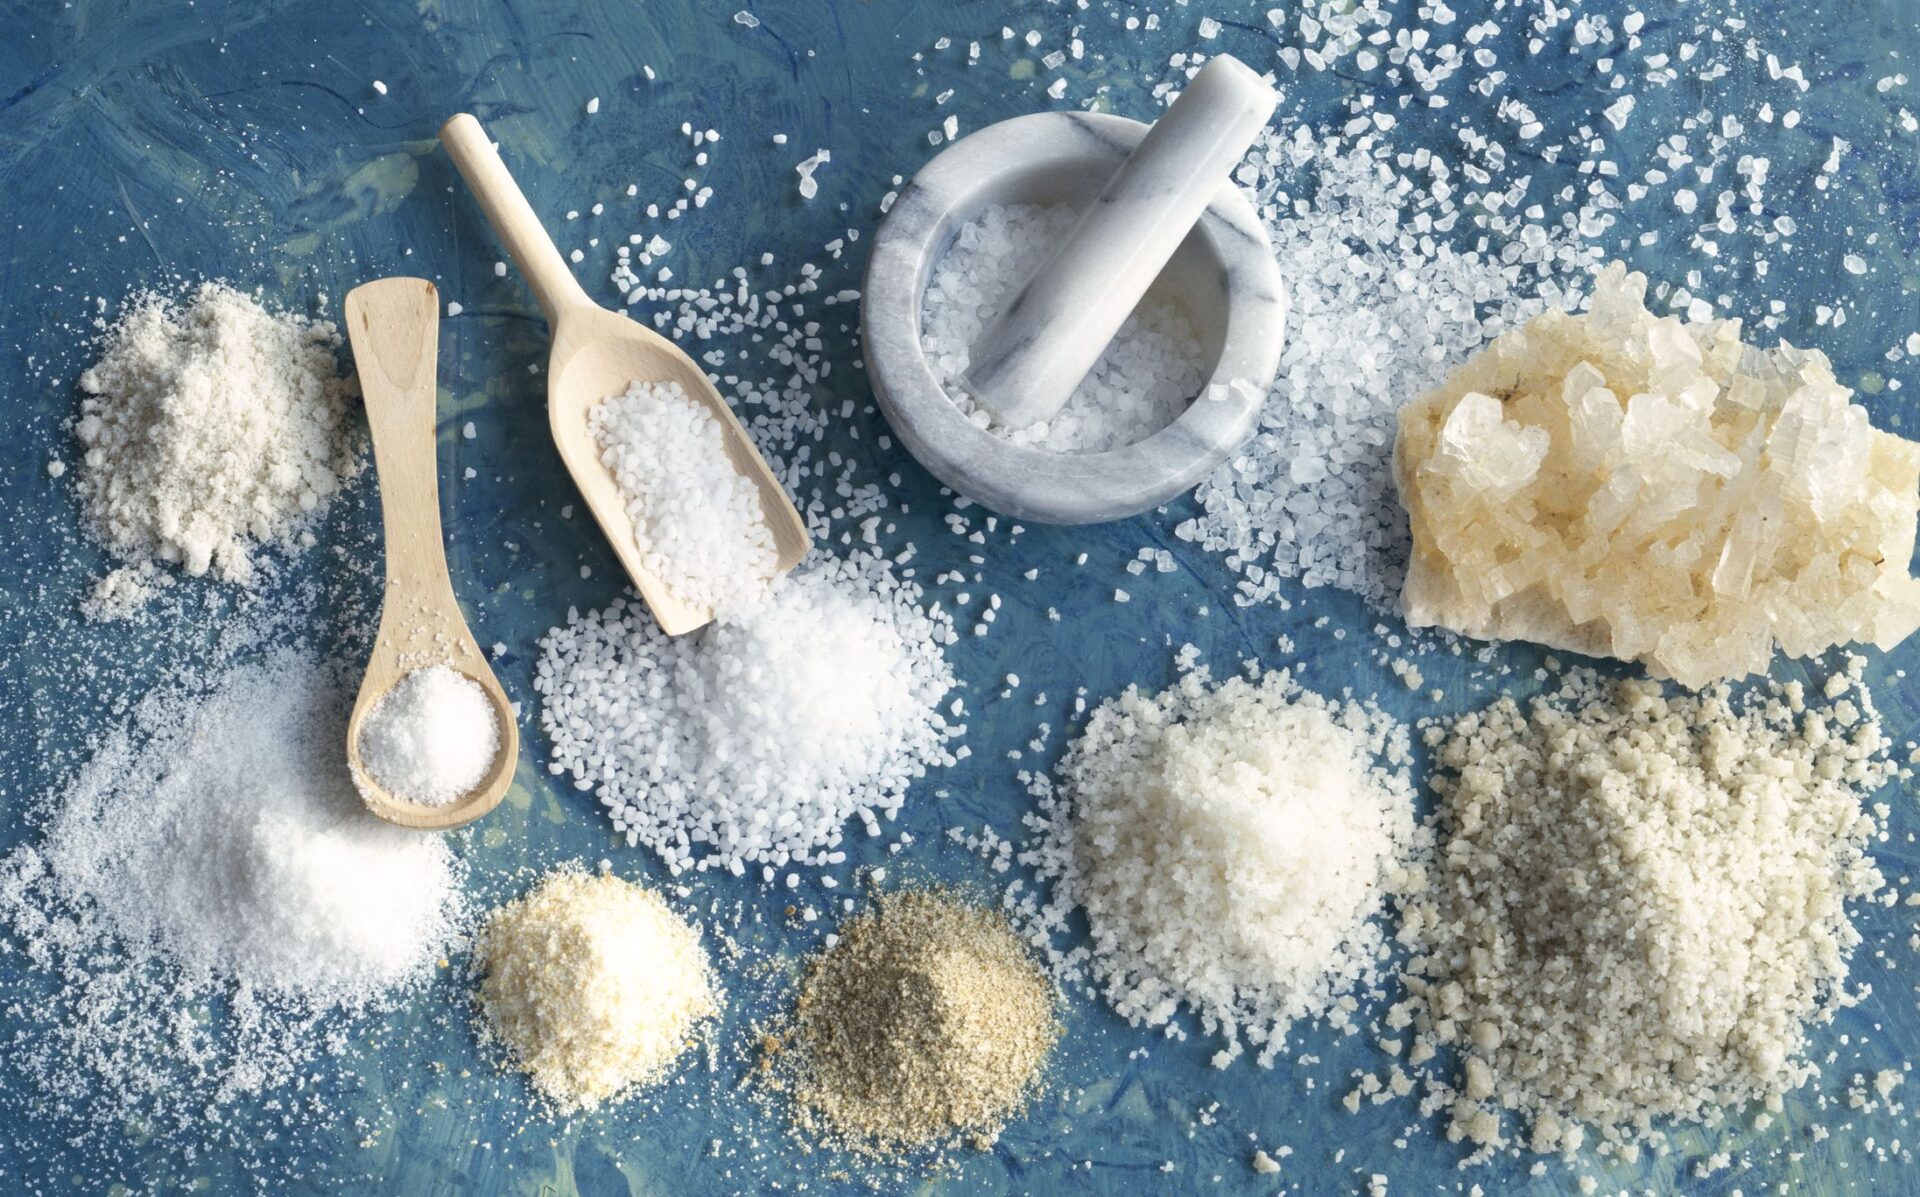 Mineral Salt Ingredients Market Is Estimated To Witness High Growth Owing To Increasing Demand for Healthy and Natural Ingredients